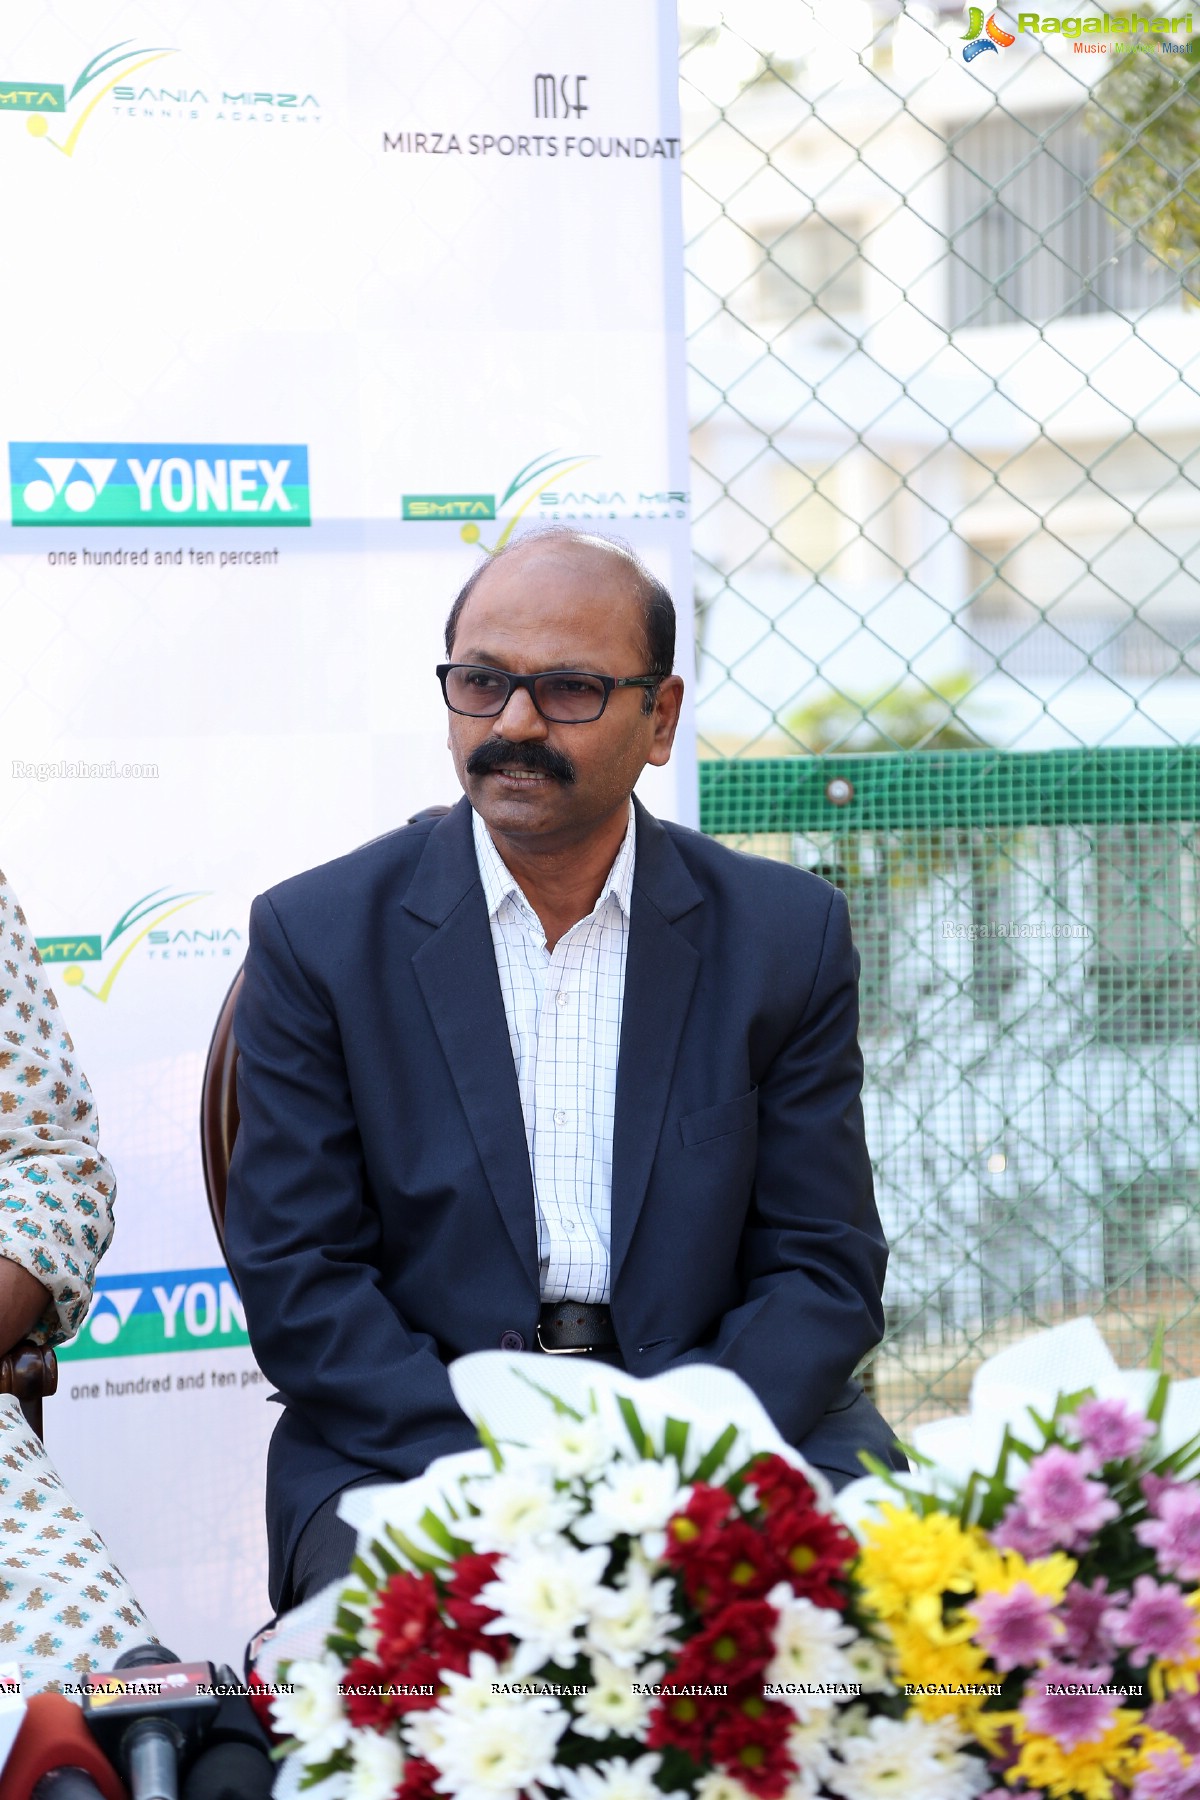 Launch of Grassroot Level Academy by Sania Mirza Tennis Academy (SMTA)